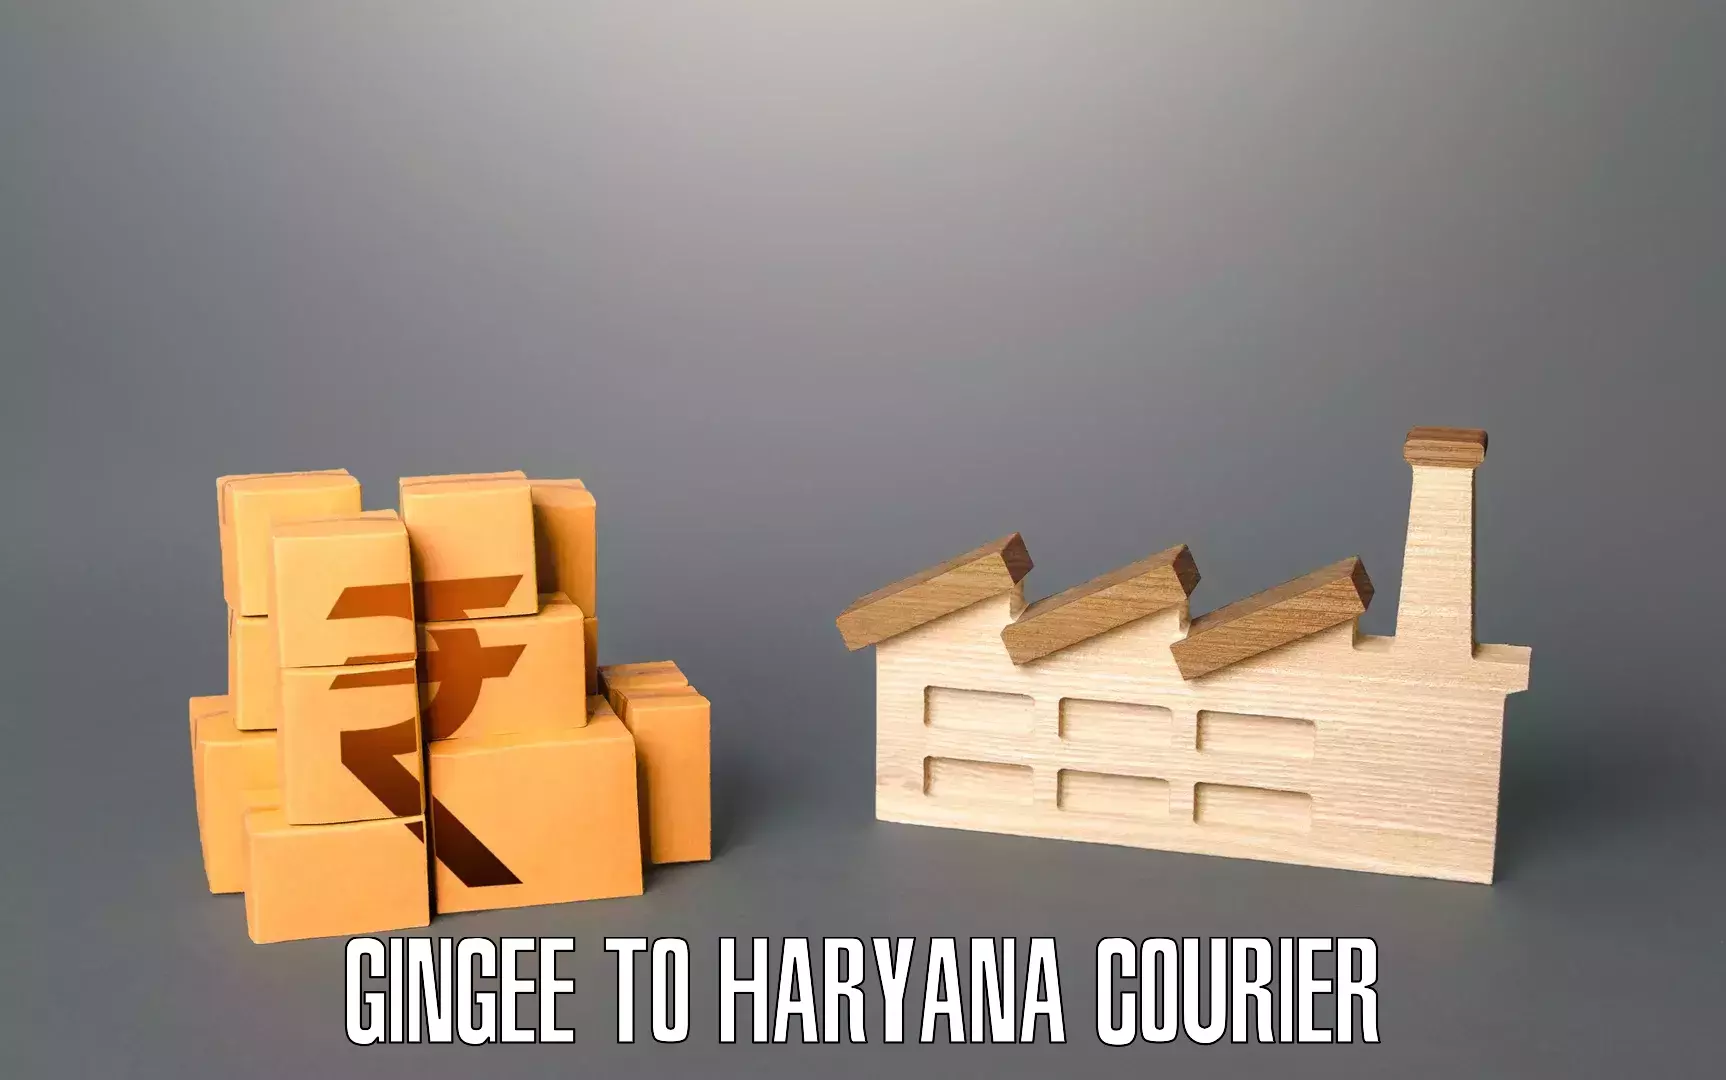 Furniture transport specialists Gingee to Narwana